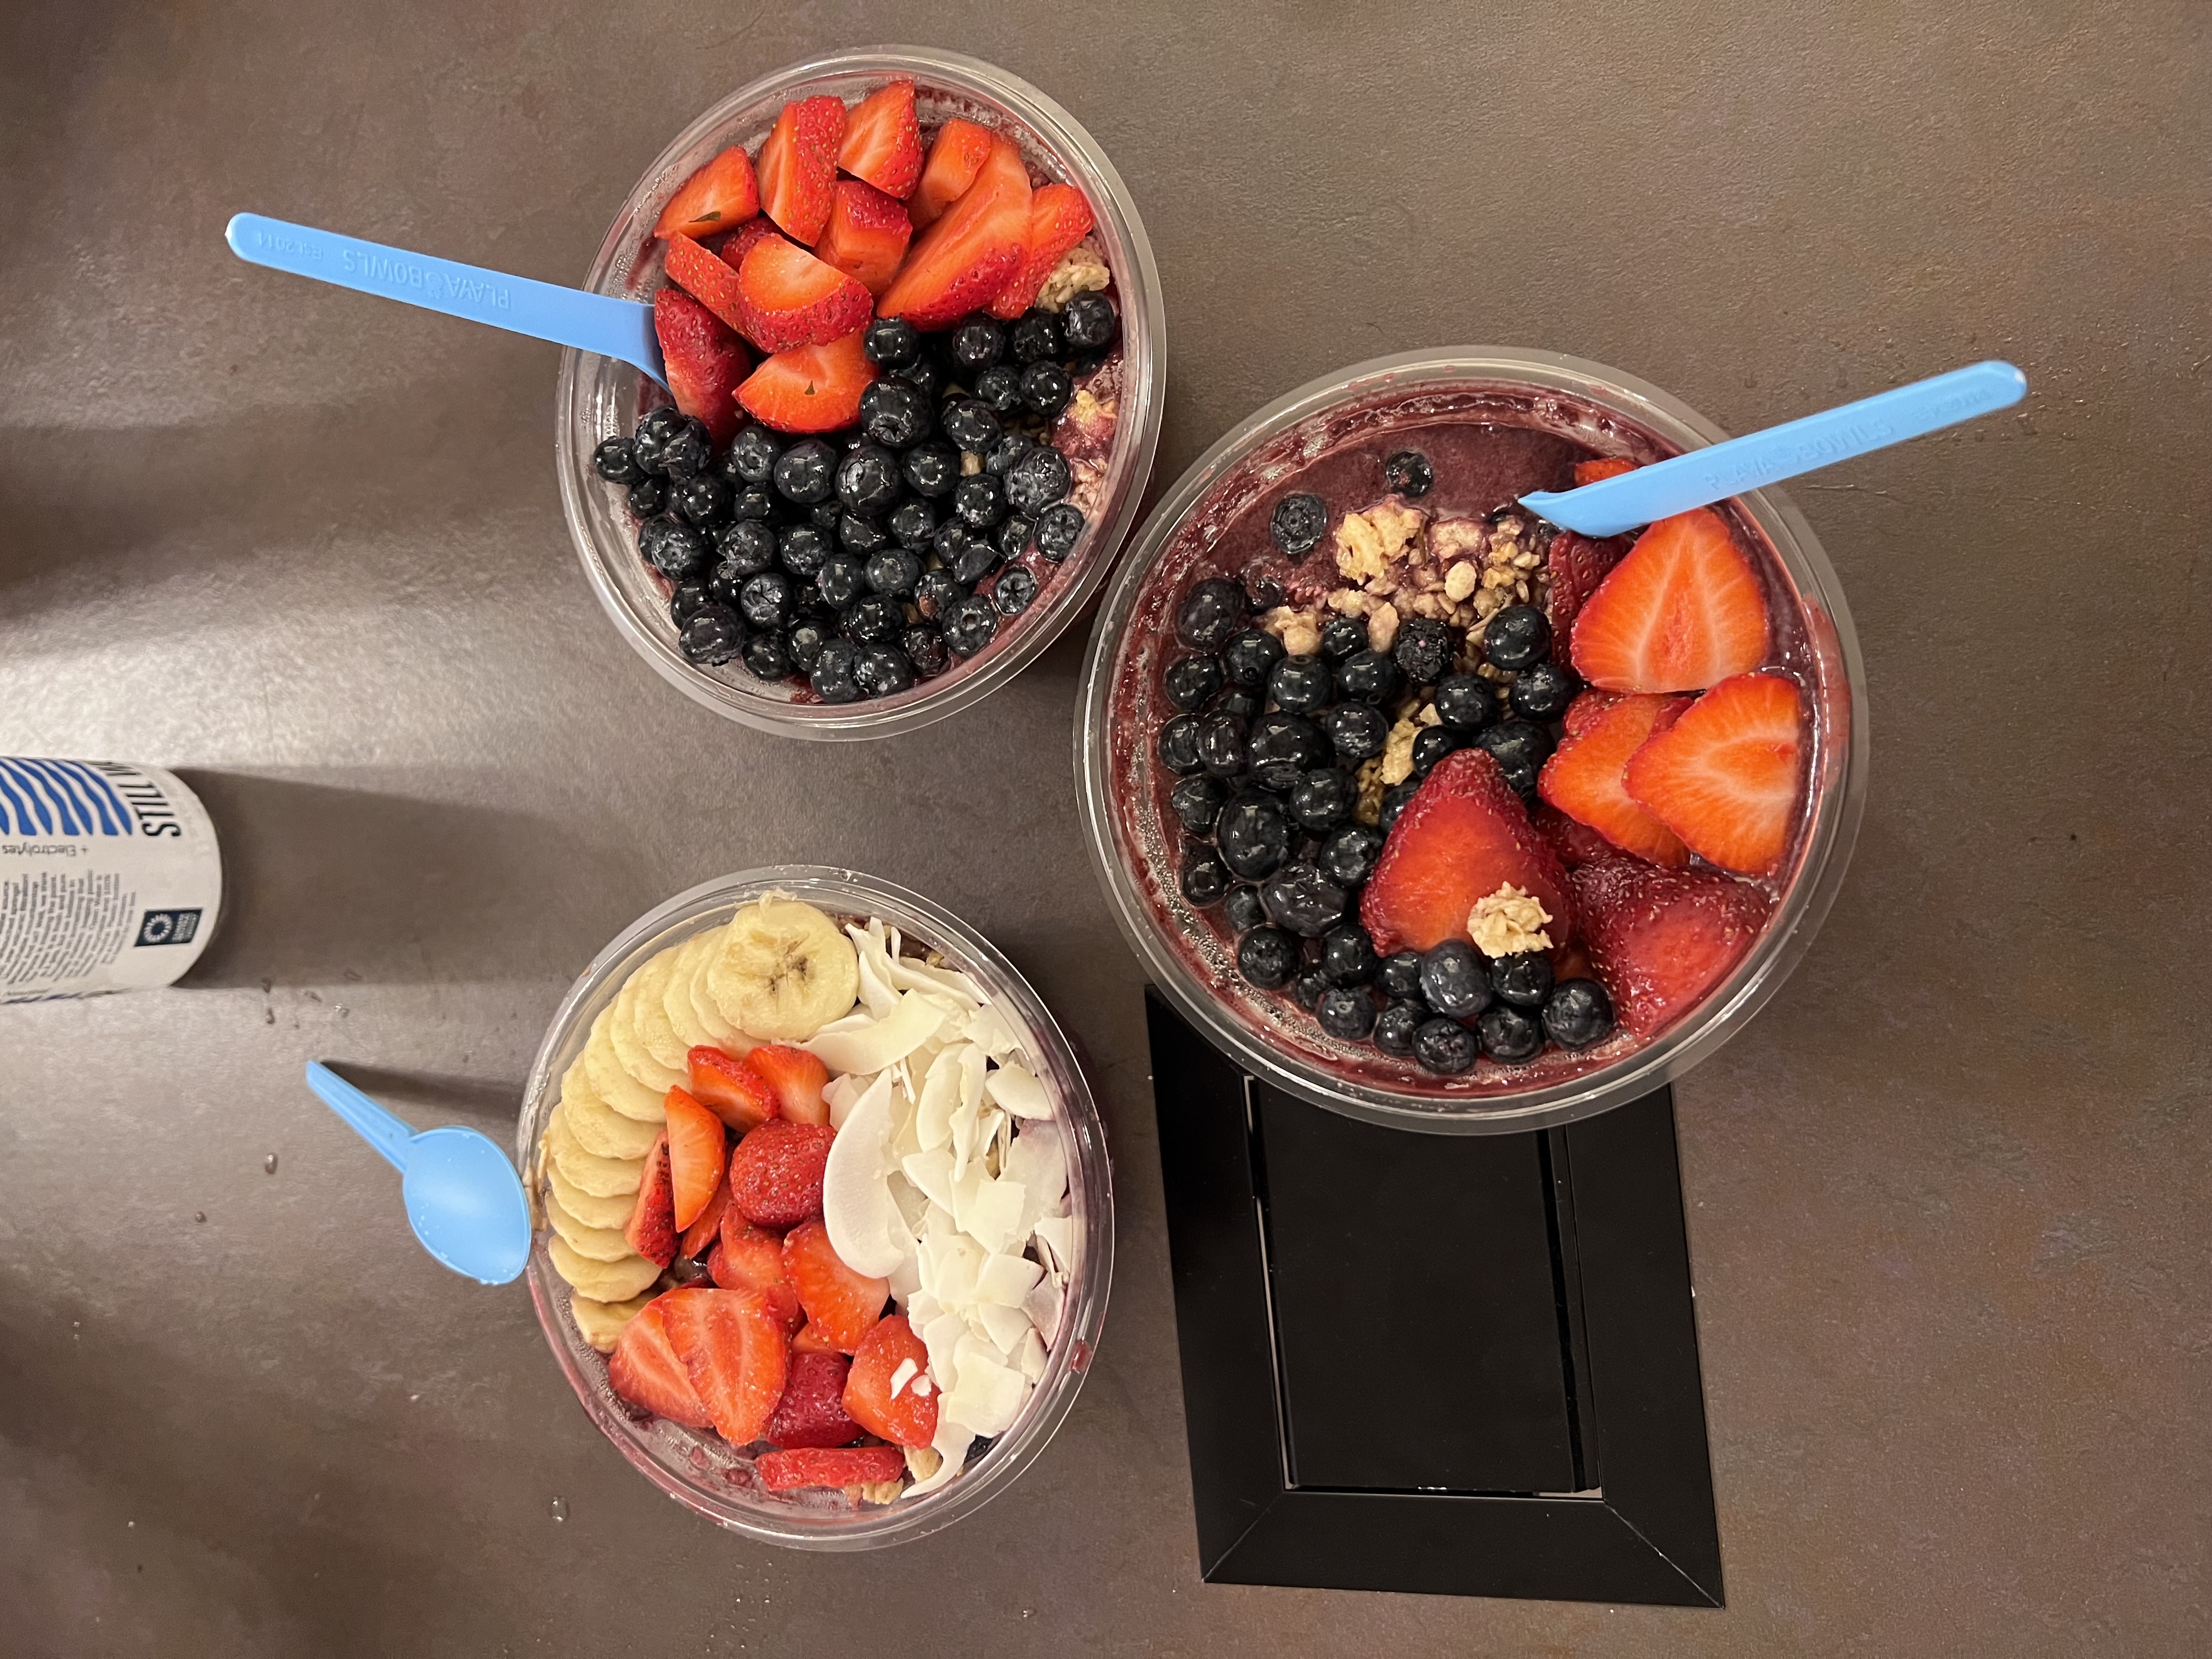 three bowls of acai bowls with strawberry, blueberries, banana slices, and coconut flakes